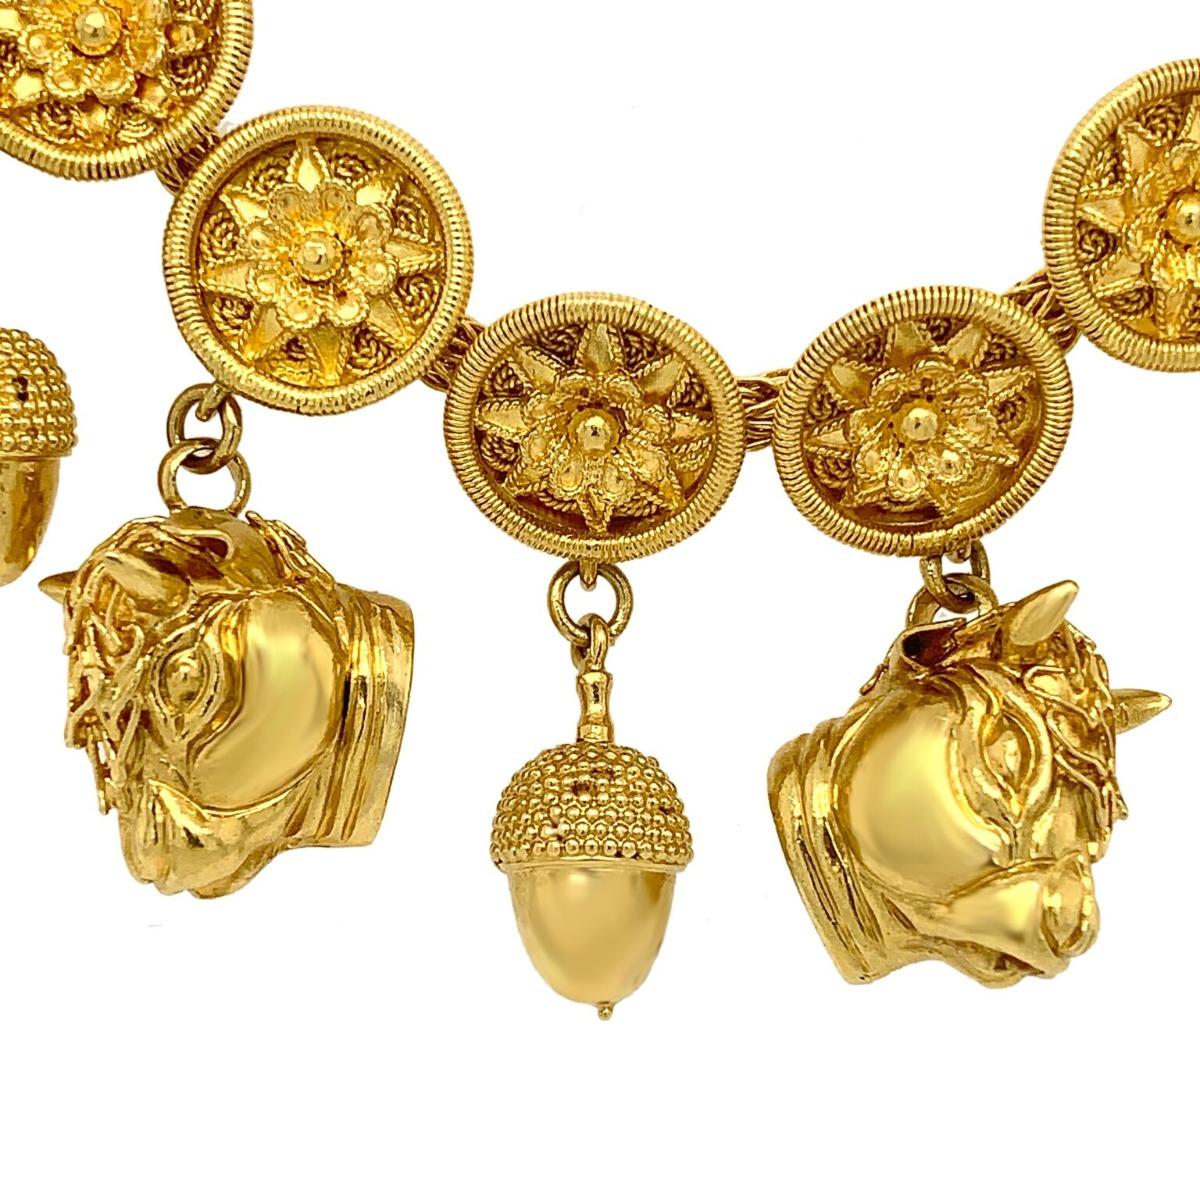 Lalaounis 18 Karat Yellow Gold with Ram's Head Necklace 3